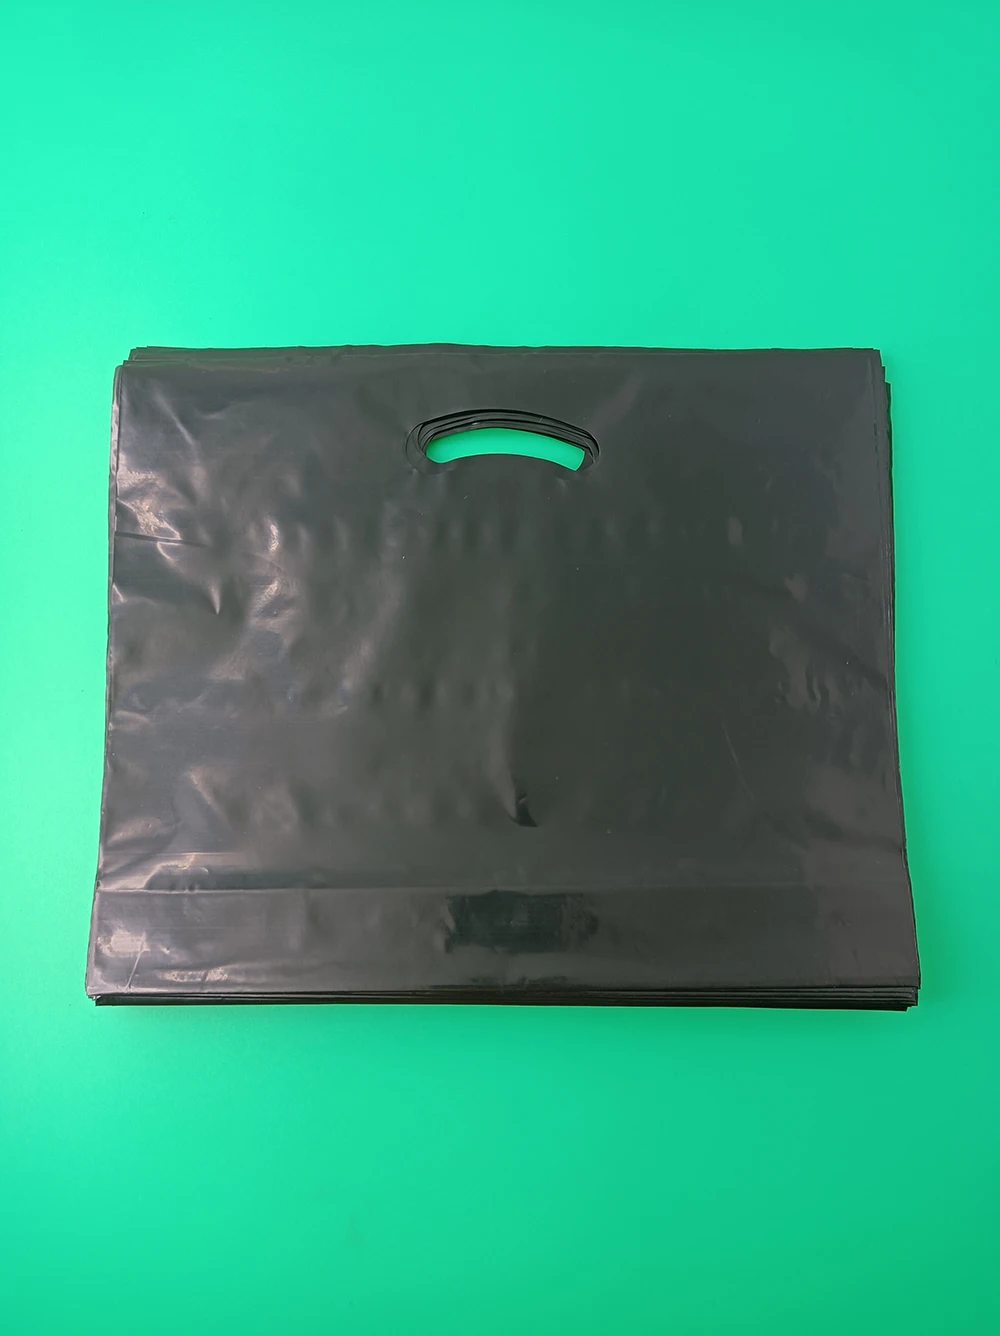 

Black Tote bag Plastic Shopping Bags poly Grocery bag Horizontal style shopping mall carrier bag Die Cut Reusable bag